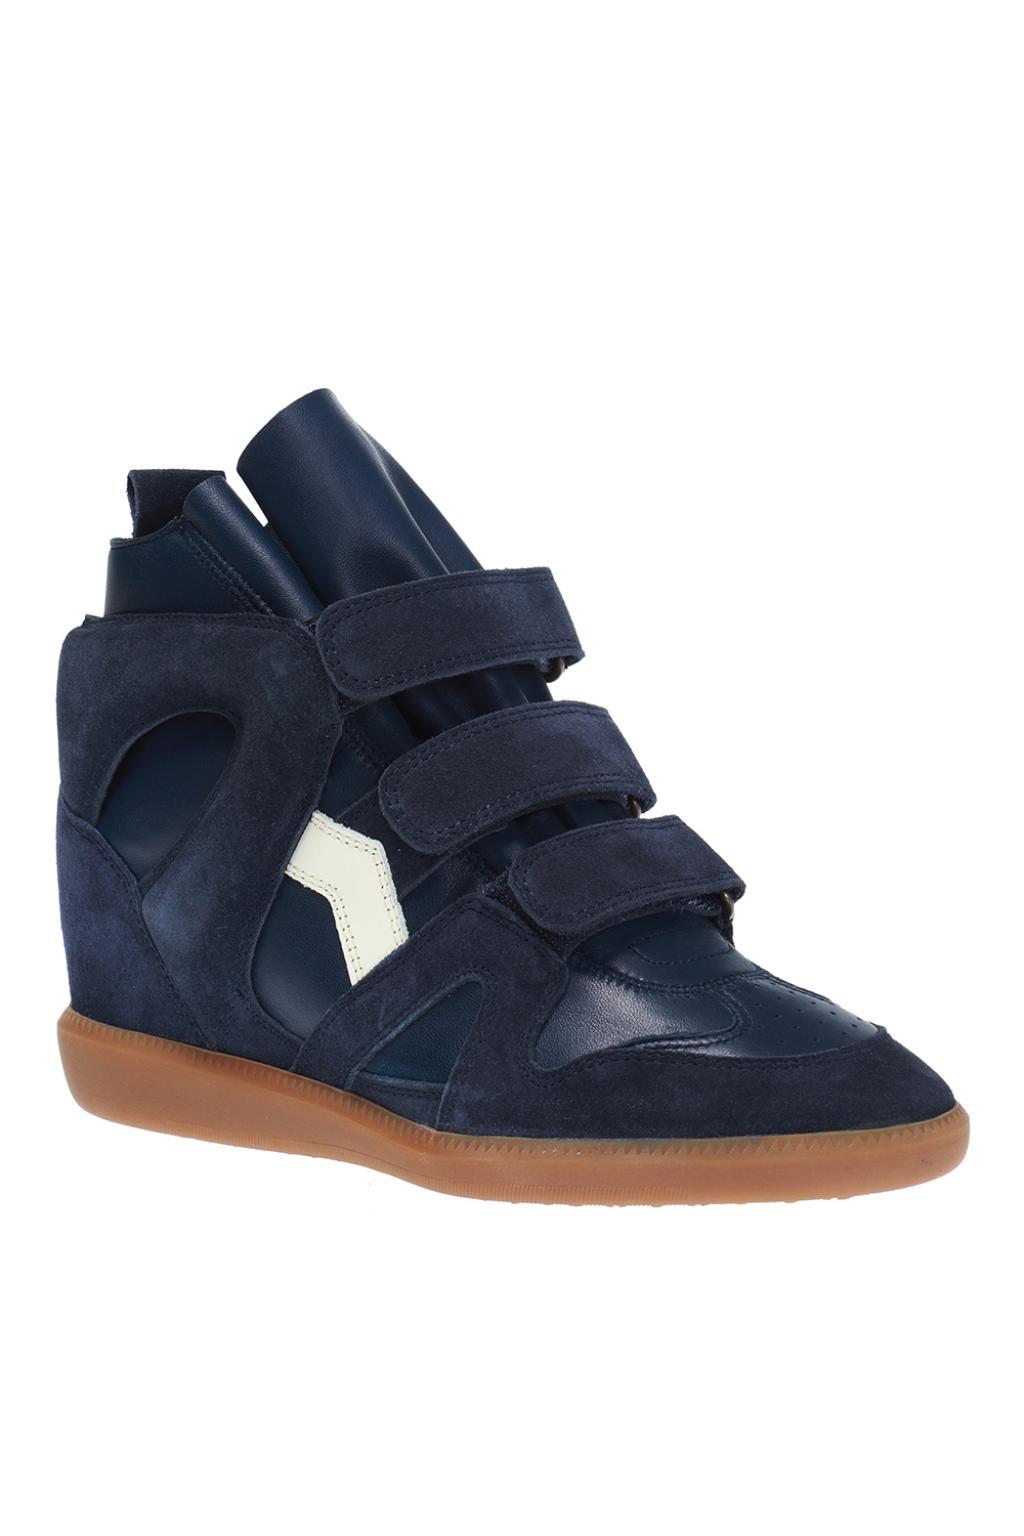 Isabel Marant Leather 'buckee' Wedge Sneakers in Navy Blue (Blue) | Lyst